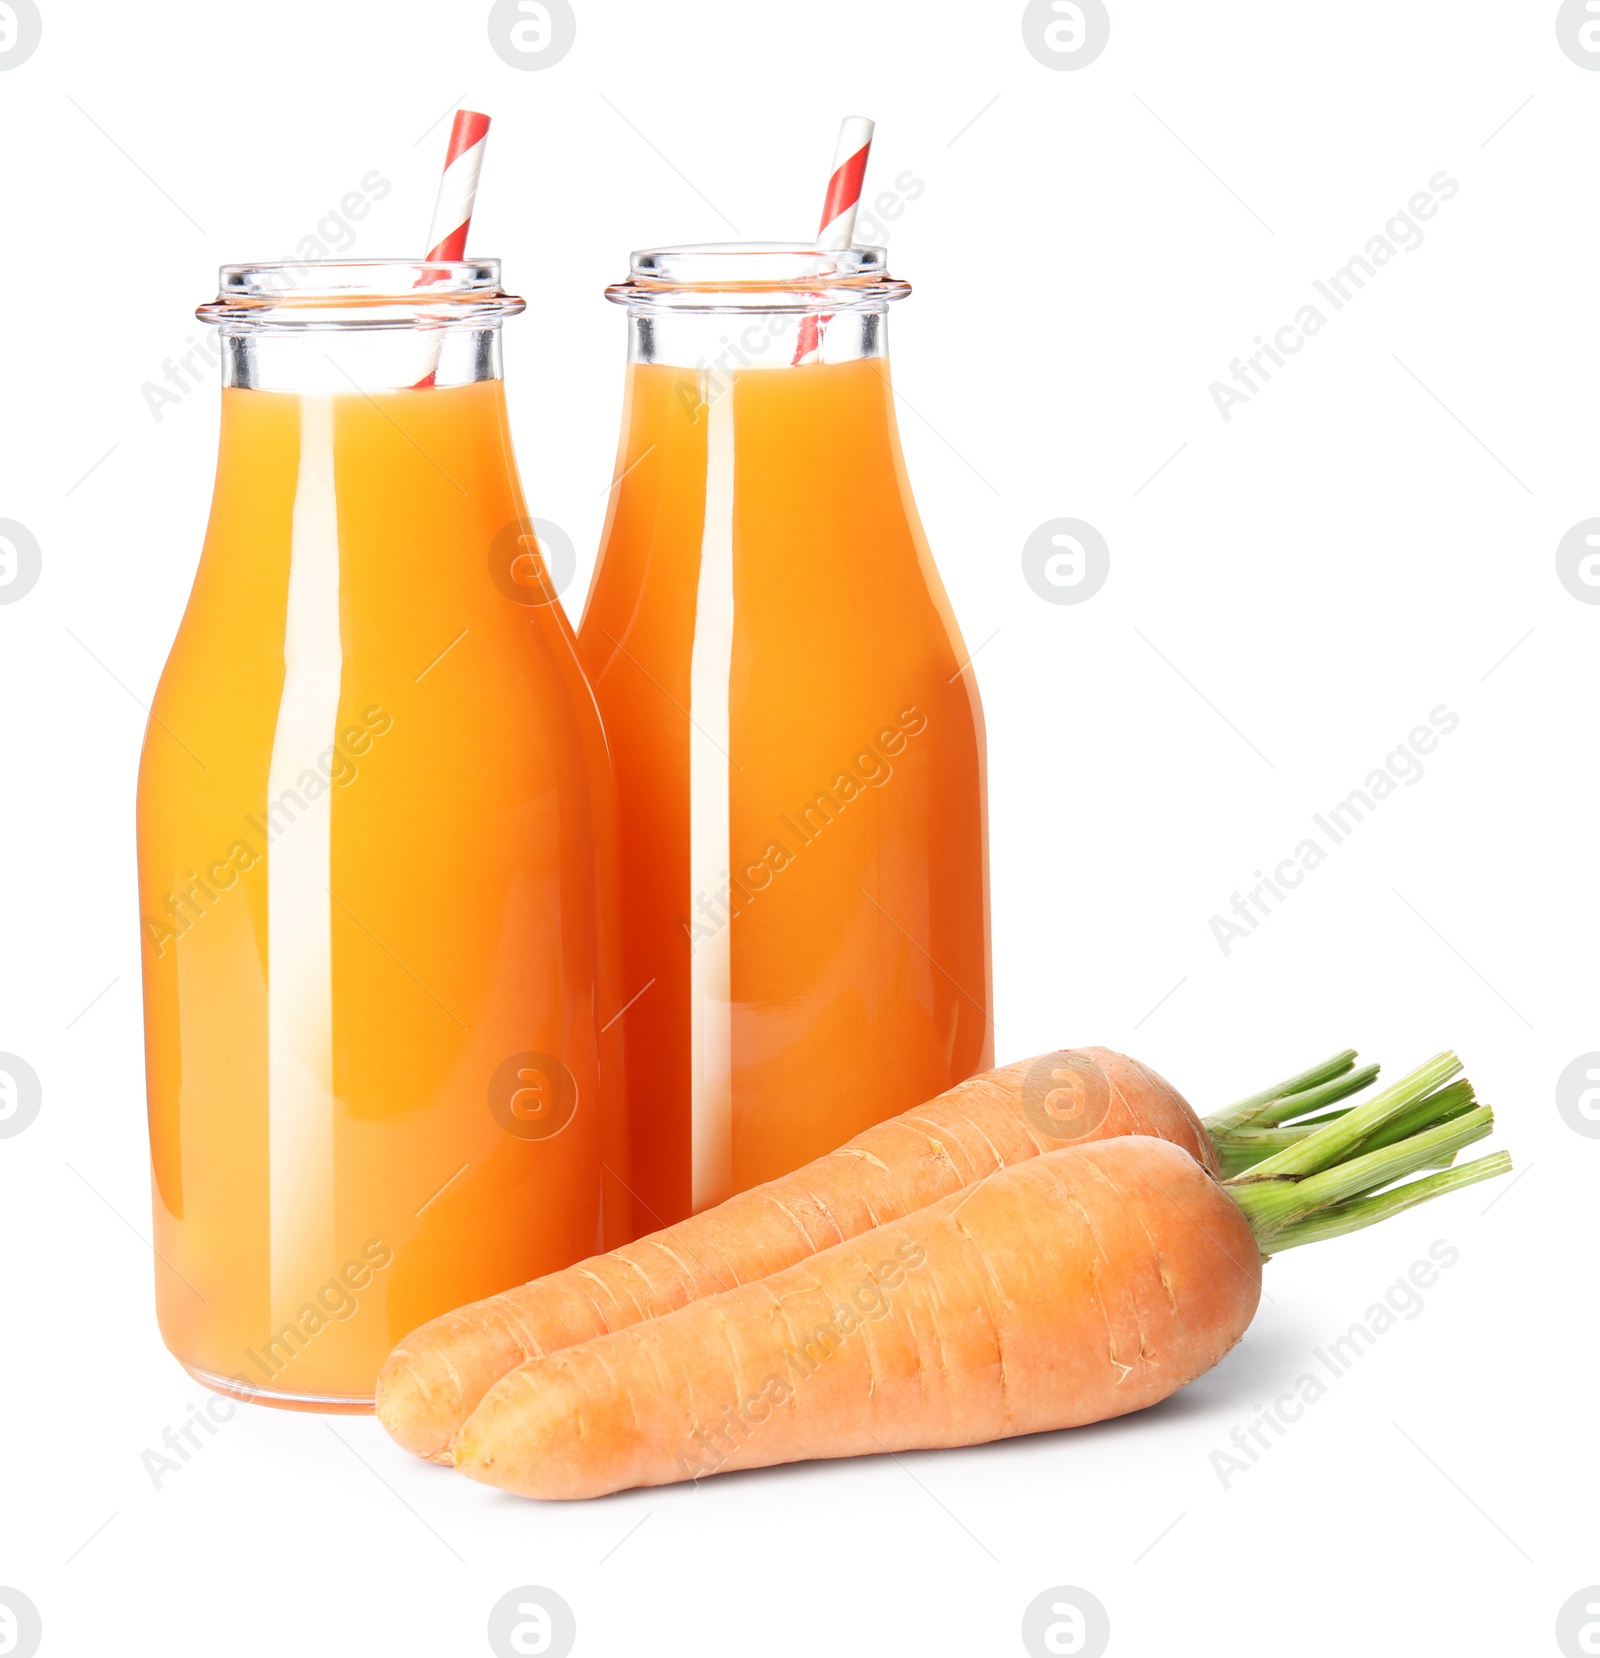 Photo of Freshly made carrot juice in glass bottles on white background